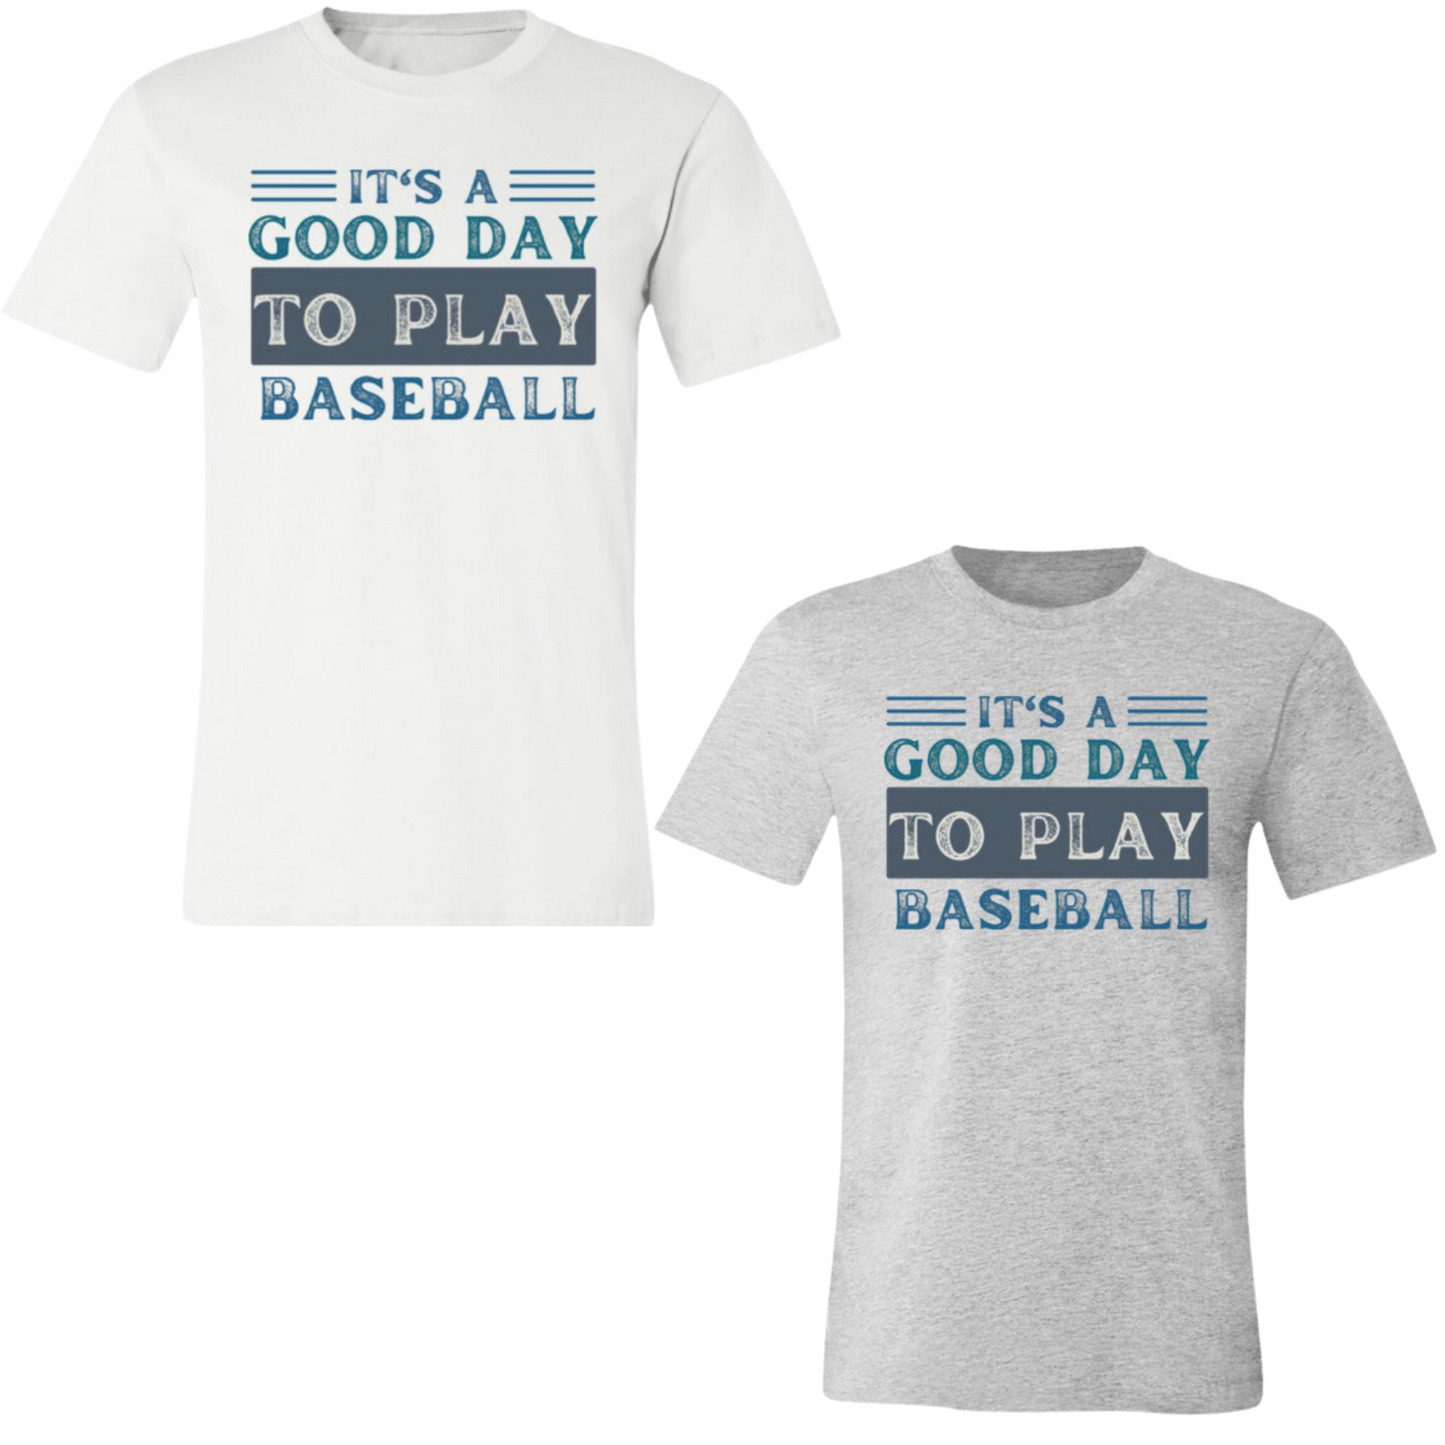 It's a Good Day to Play Baseball- Adult Comfy T-Shirt